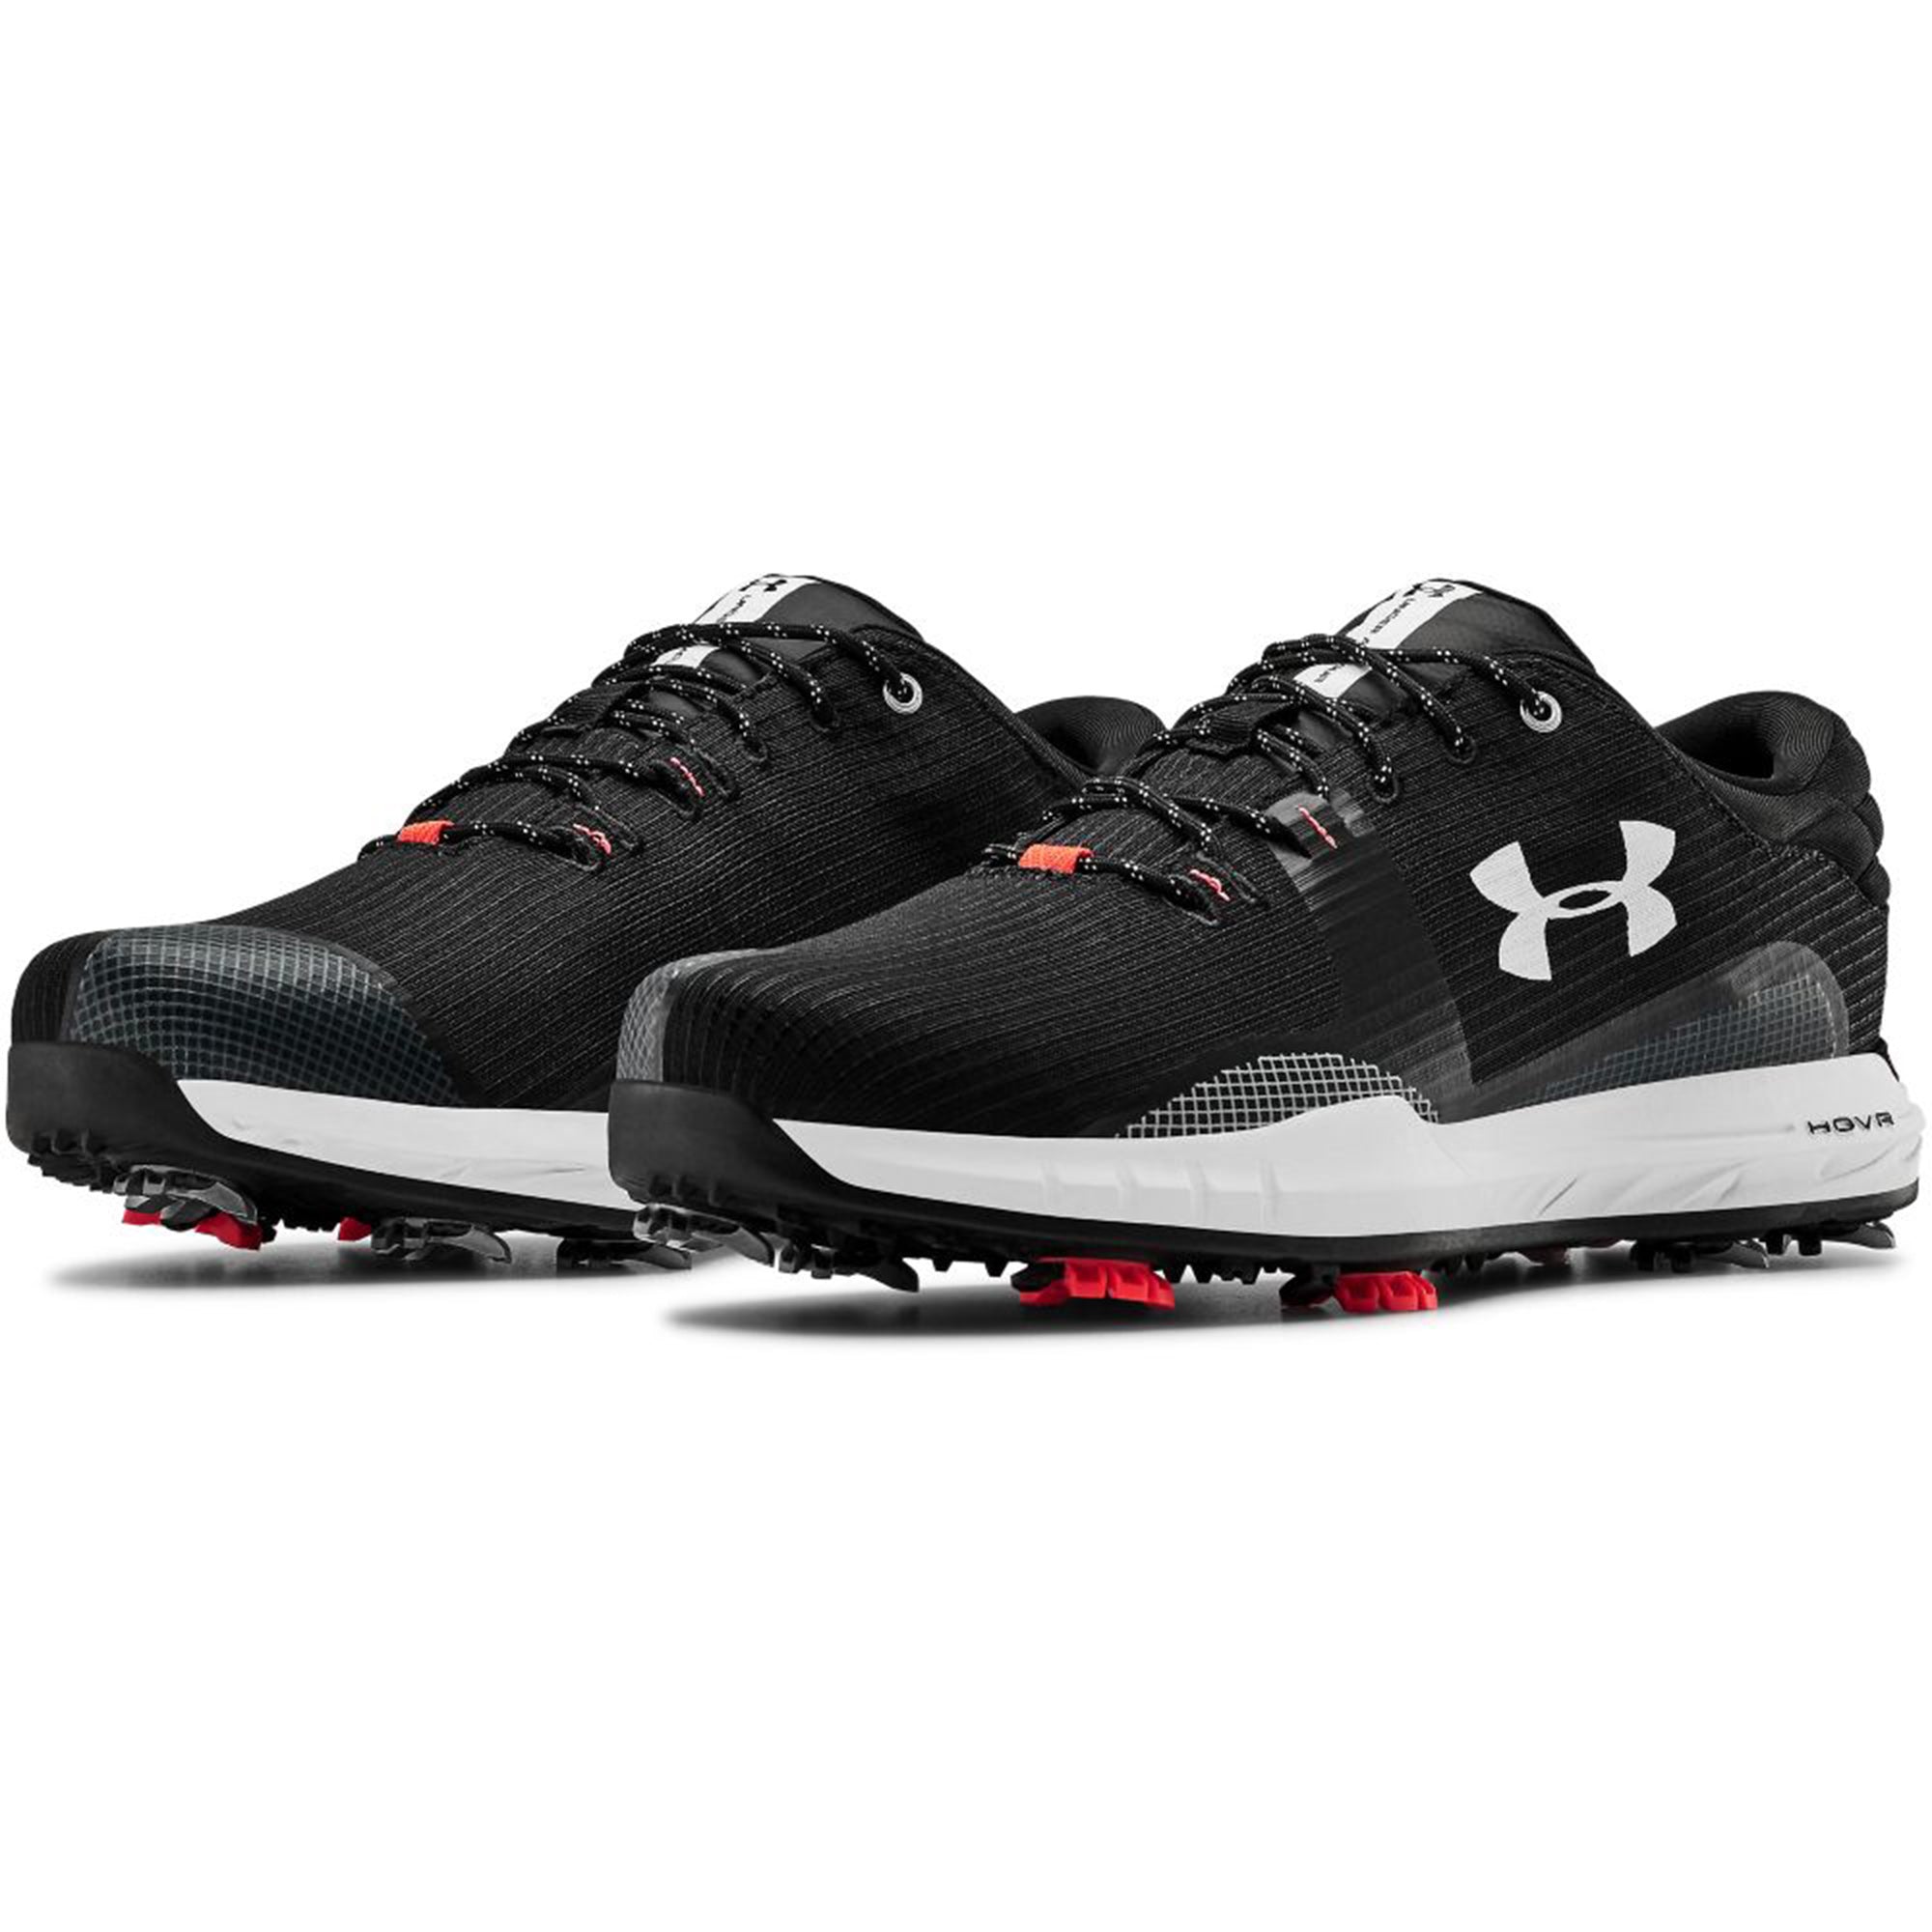 Under Armour HOVR Matchplay TE Golf Shoes 3023246 Black 001 & Function18